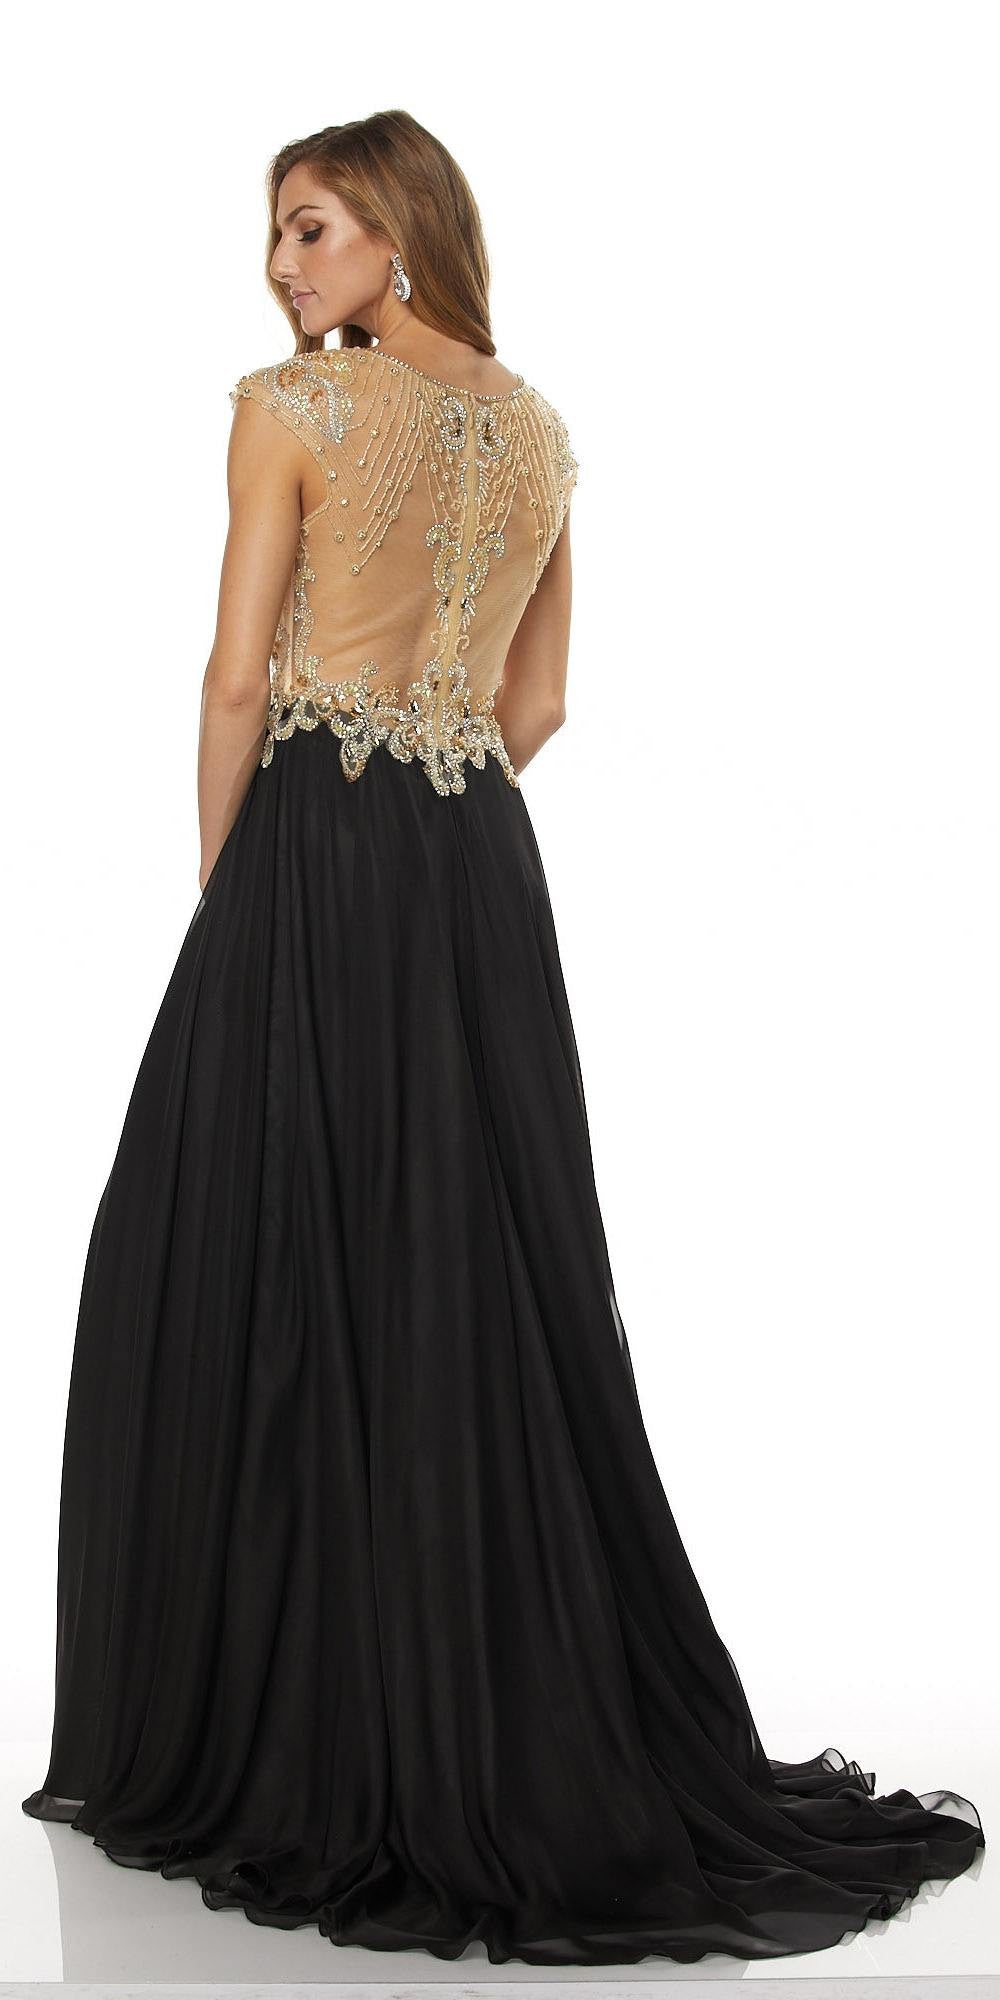 Juliet 636 Black Beaded Bodice Cap Sleeve Prom Gown with Slit and Train